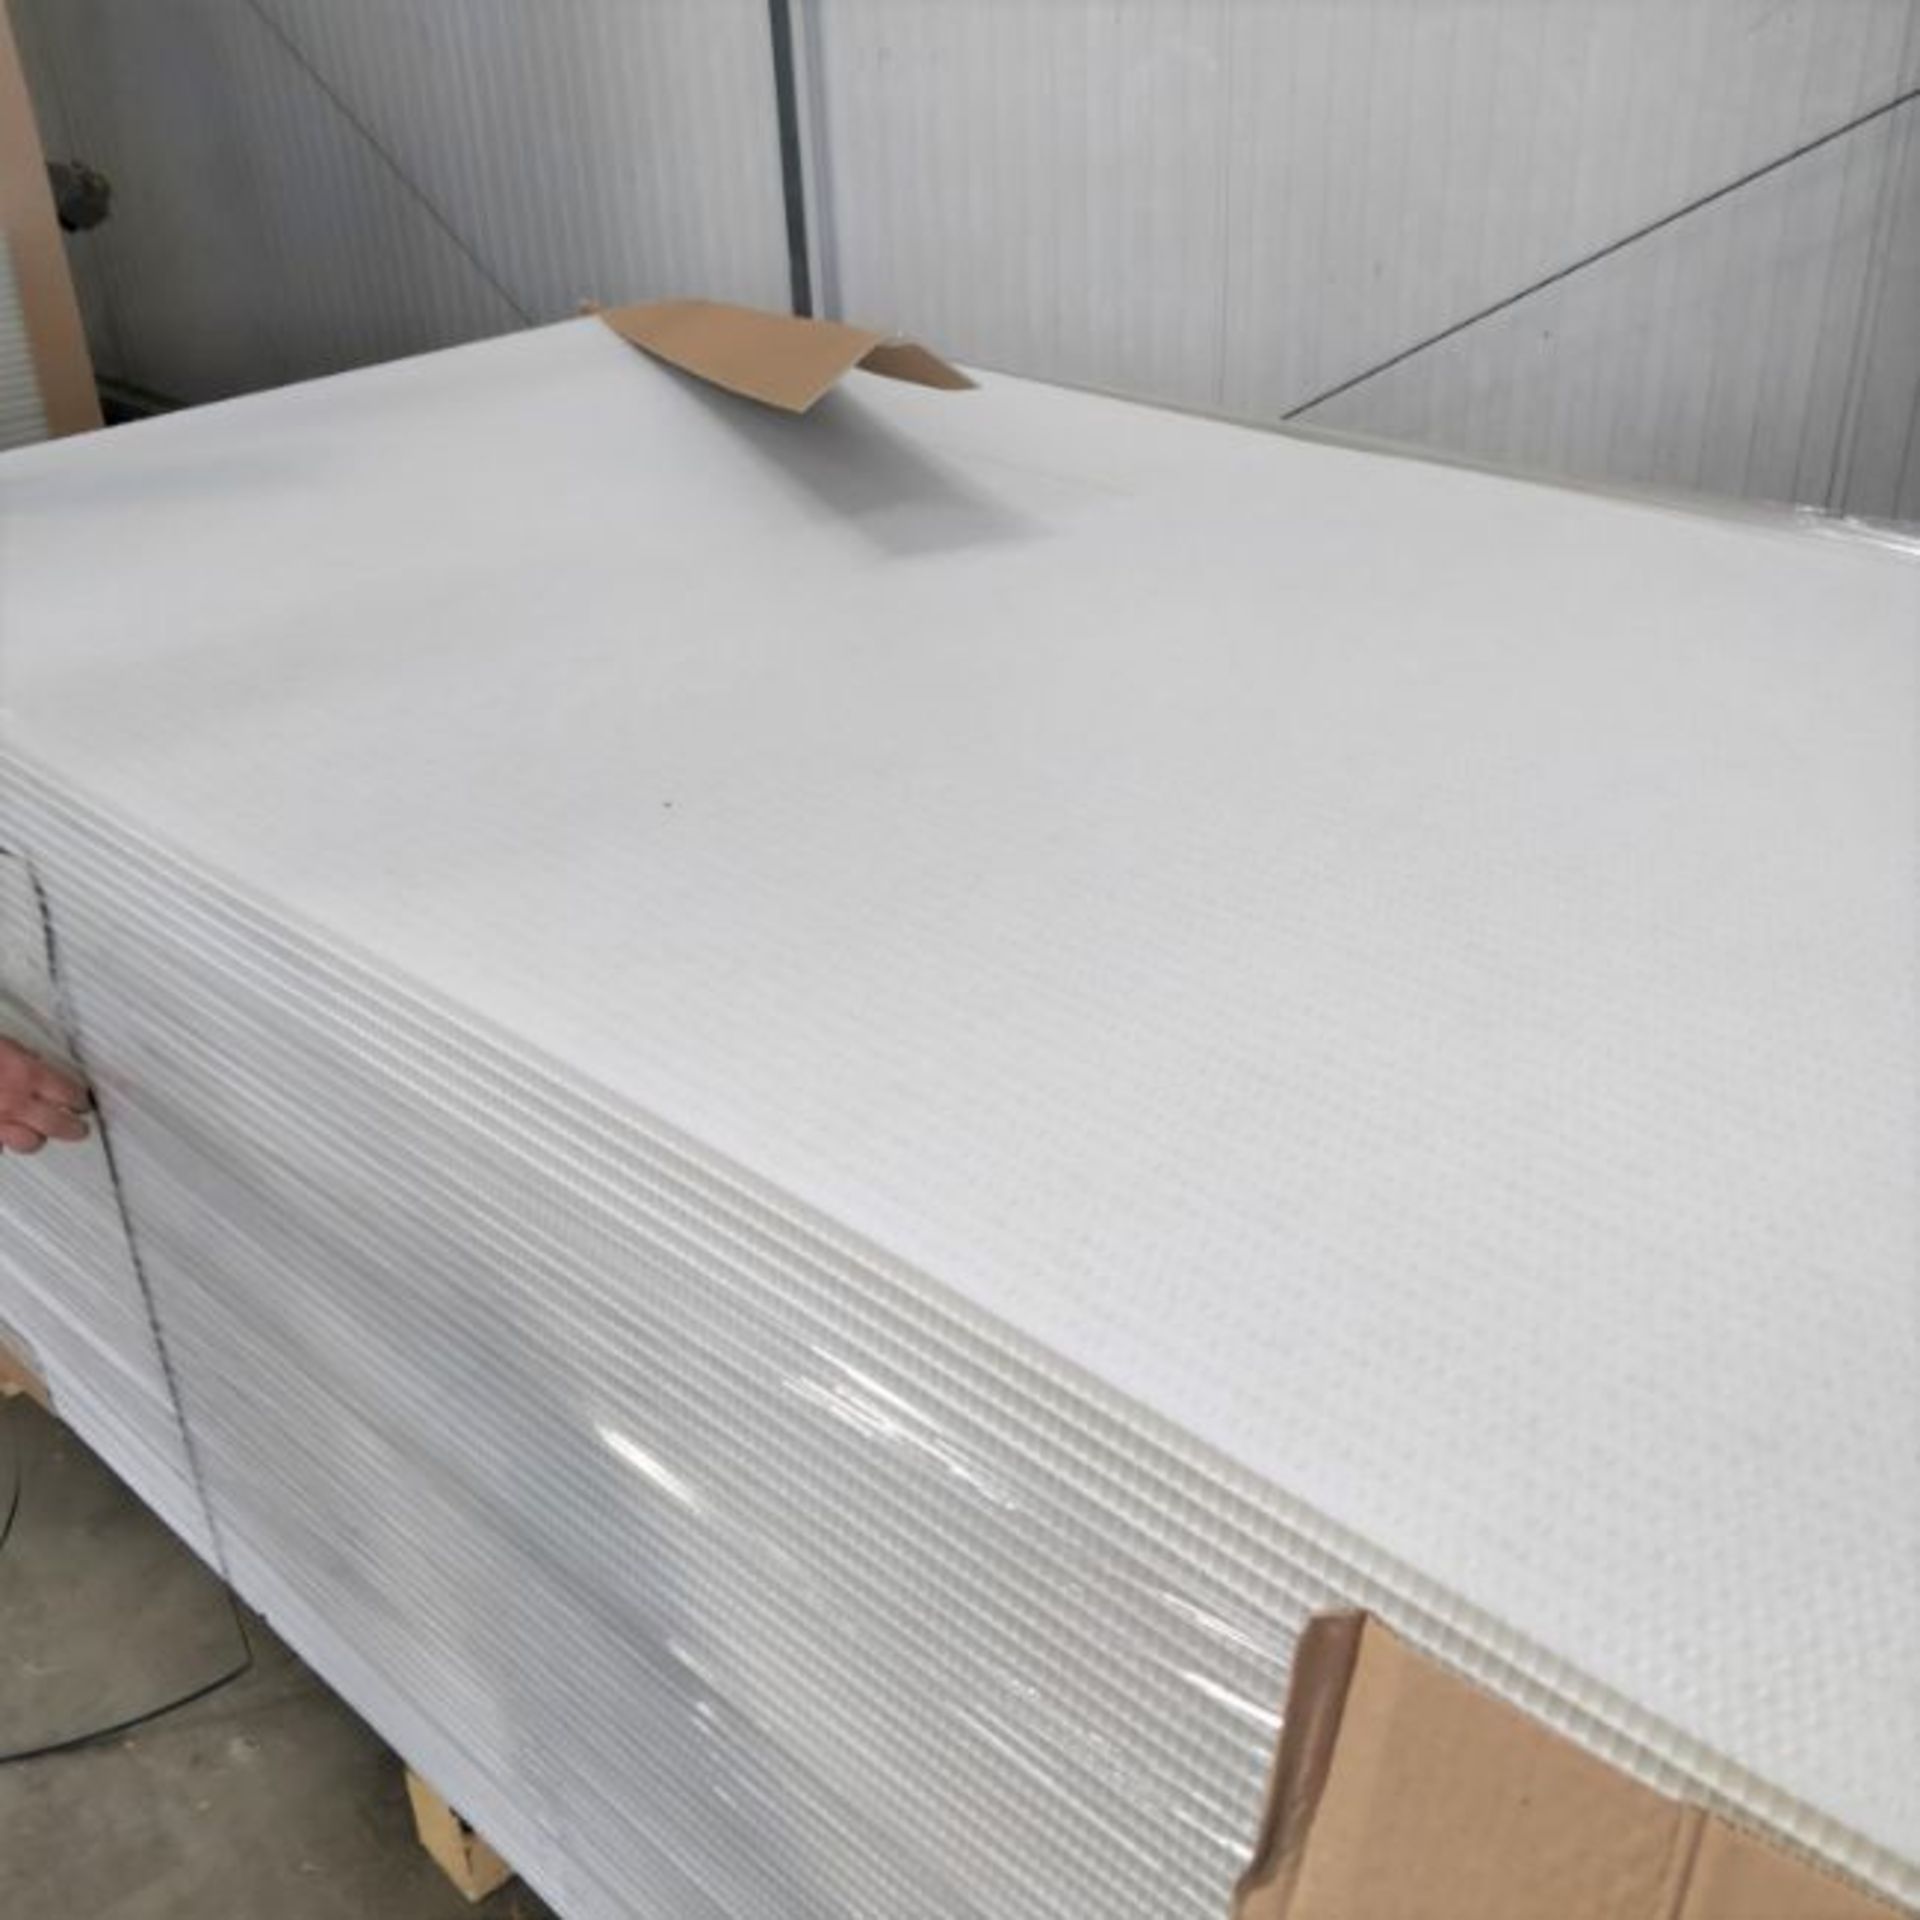 100 x ThermHex Thermoplastic Honeycomb Core Panels - Size: Approx. 2630 x 1210 x 18mm - New - Image 2 of 5